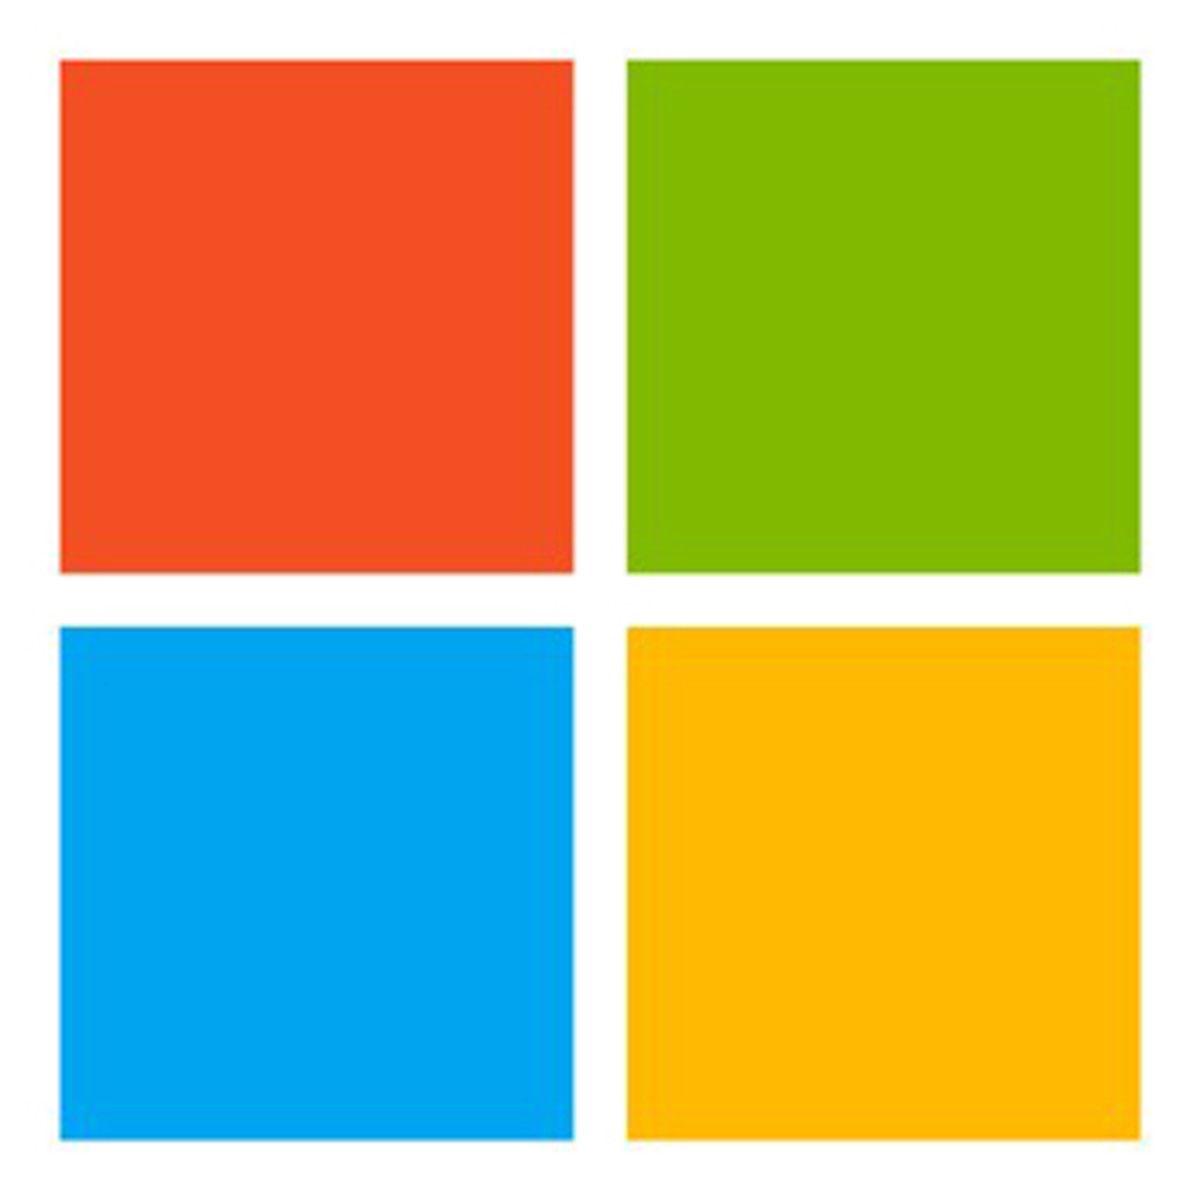 Windows 11 Logo - Microsoft extends Windows 10 commitment to at least 2026 but reduces ...